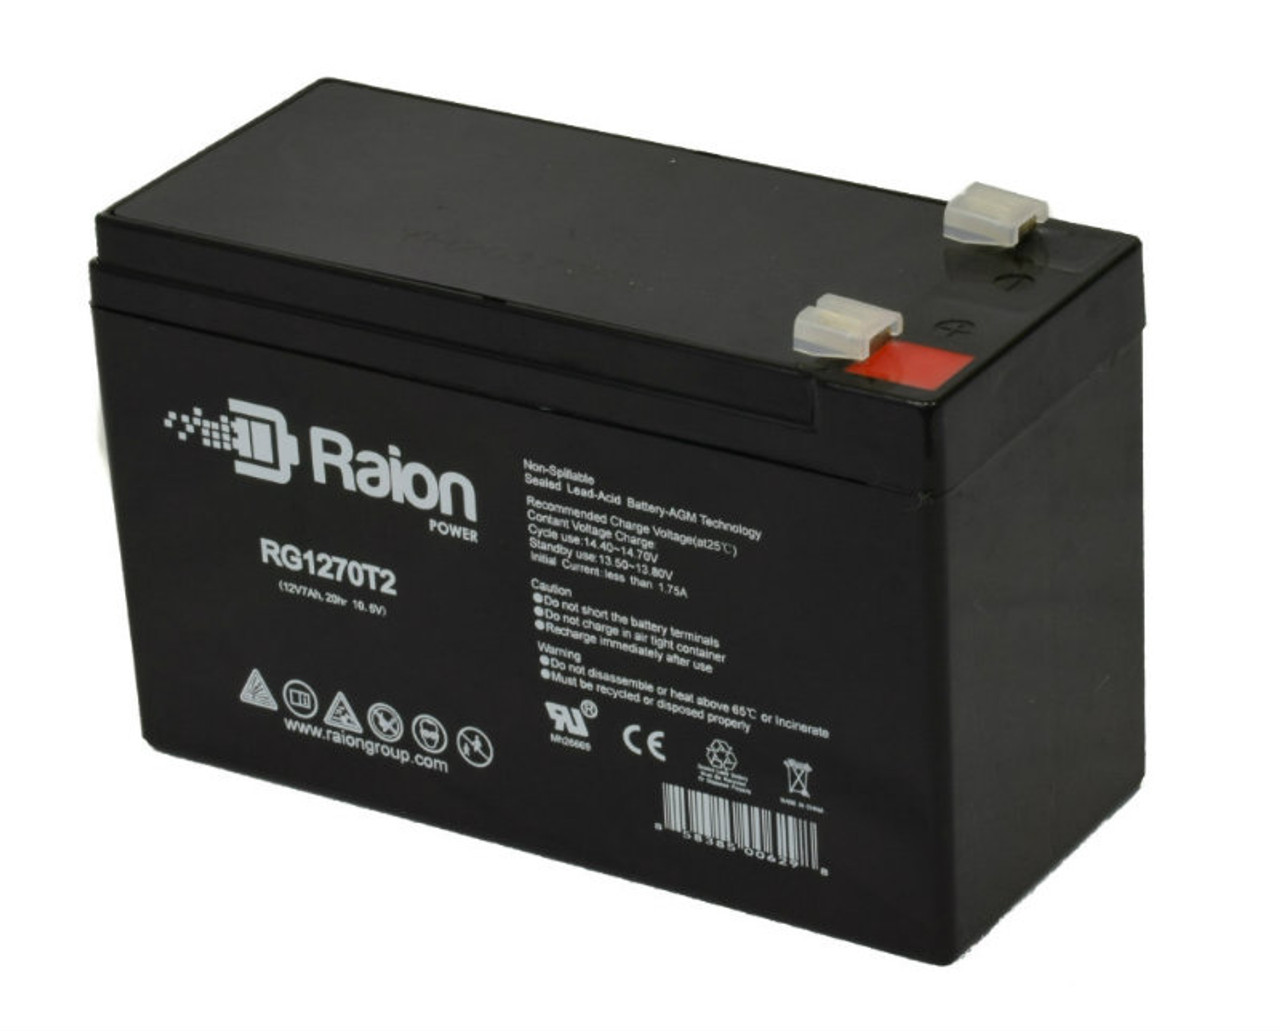 Raion Power RG1270T2 12V 7Ah Rechargeable Battery for Leoch DJW12-7.2